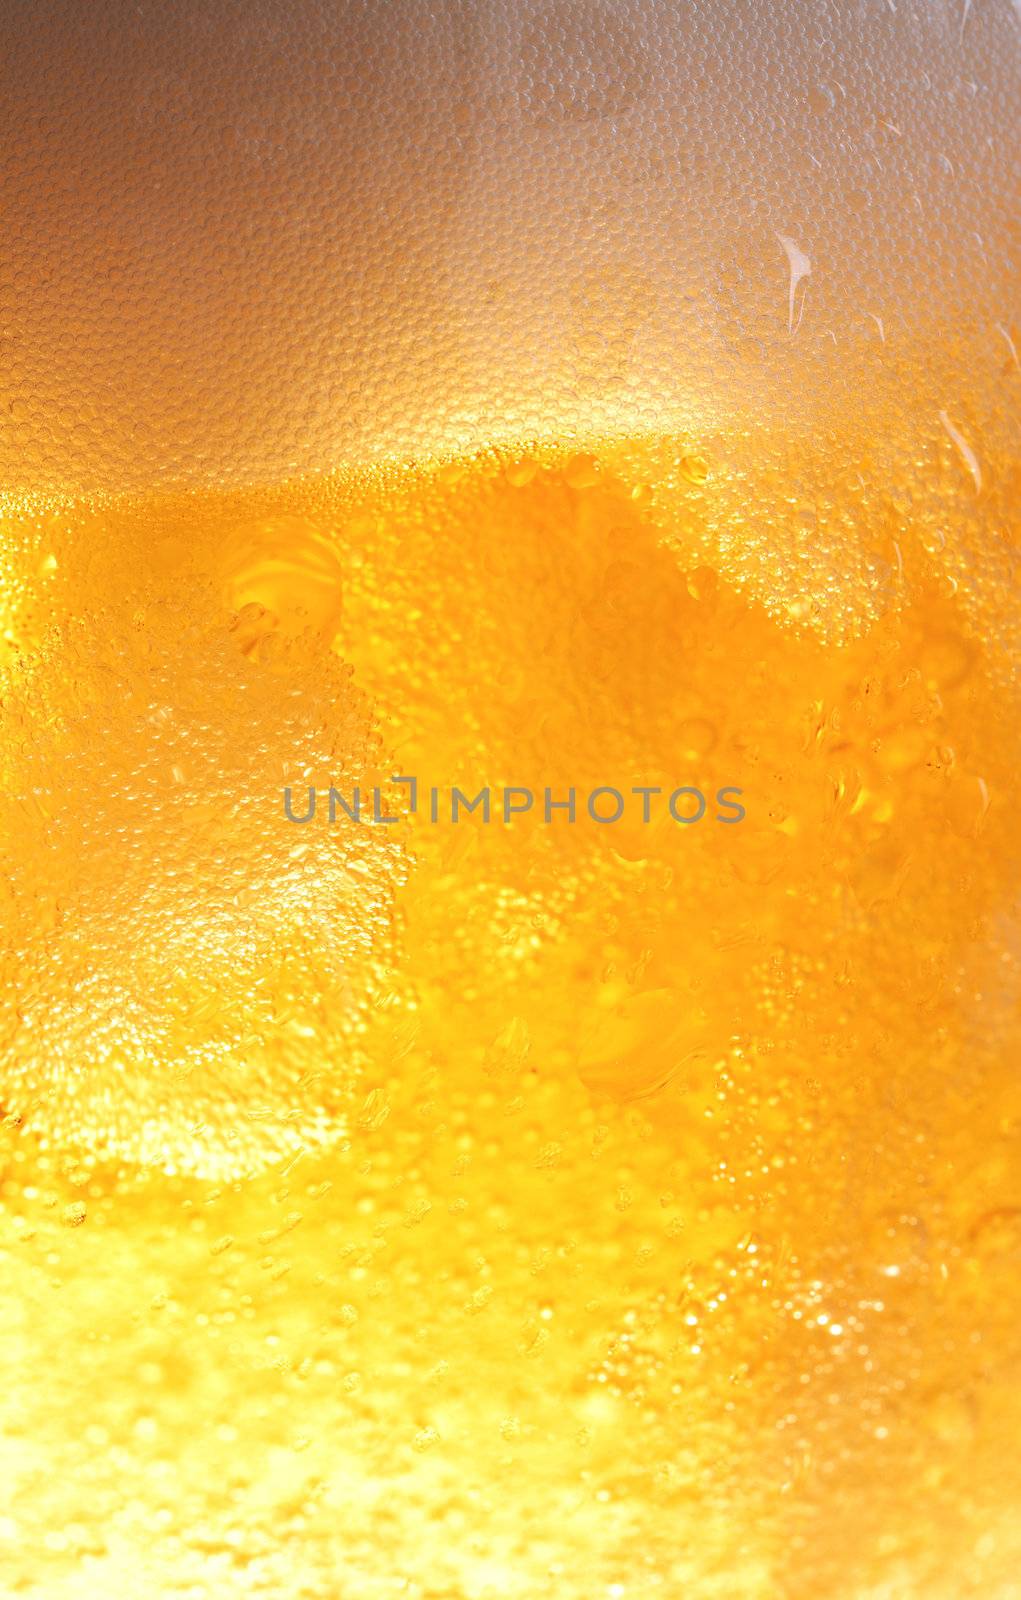 Beer by Stocksnapper